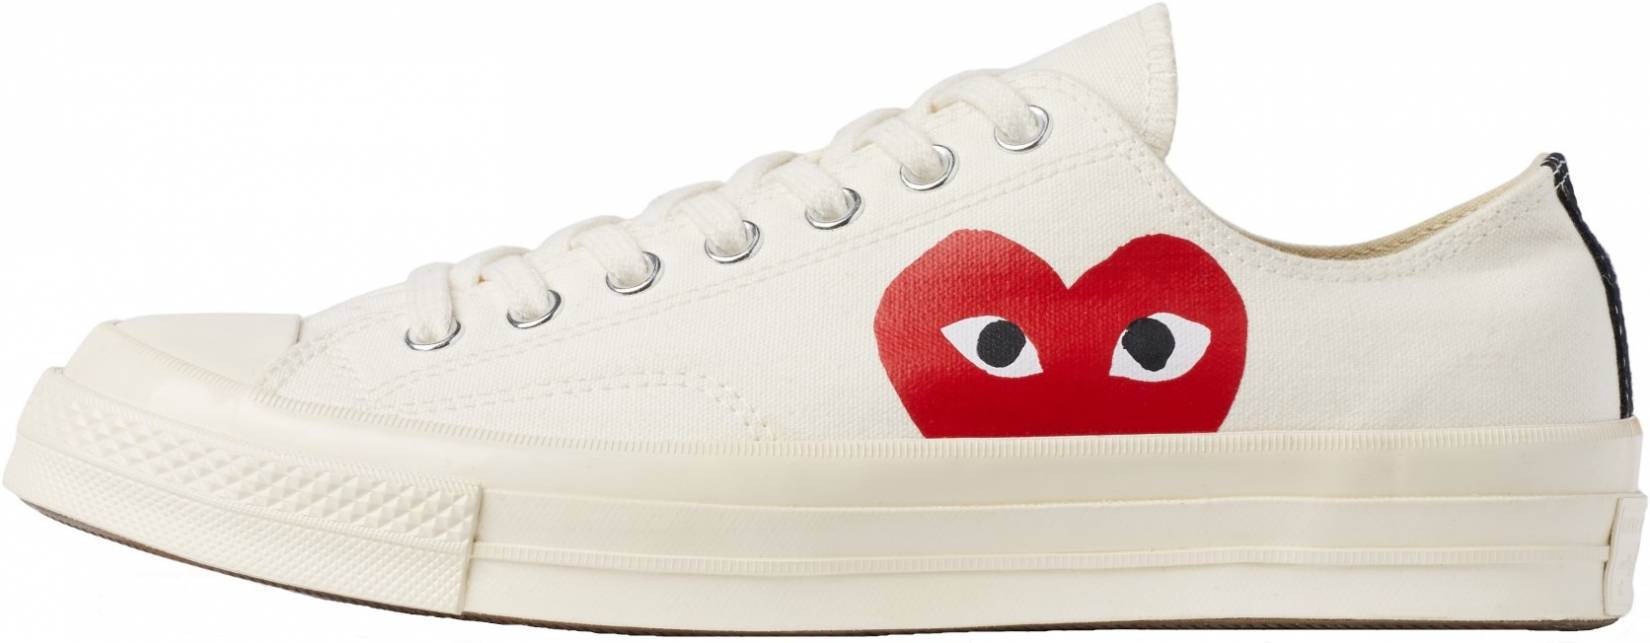 8 Reasons to/NOT to Buy Comme des Garcons PLAY x Converse Chuck